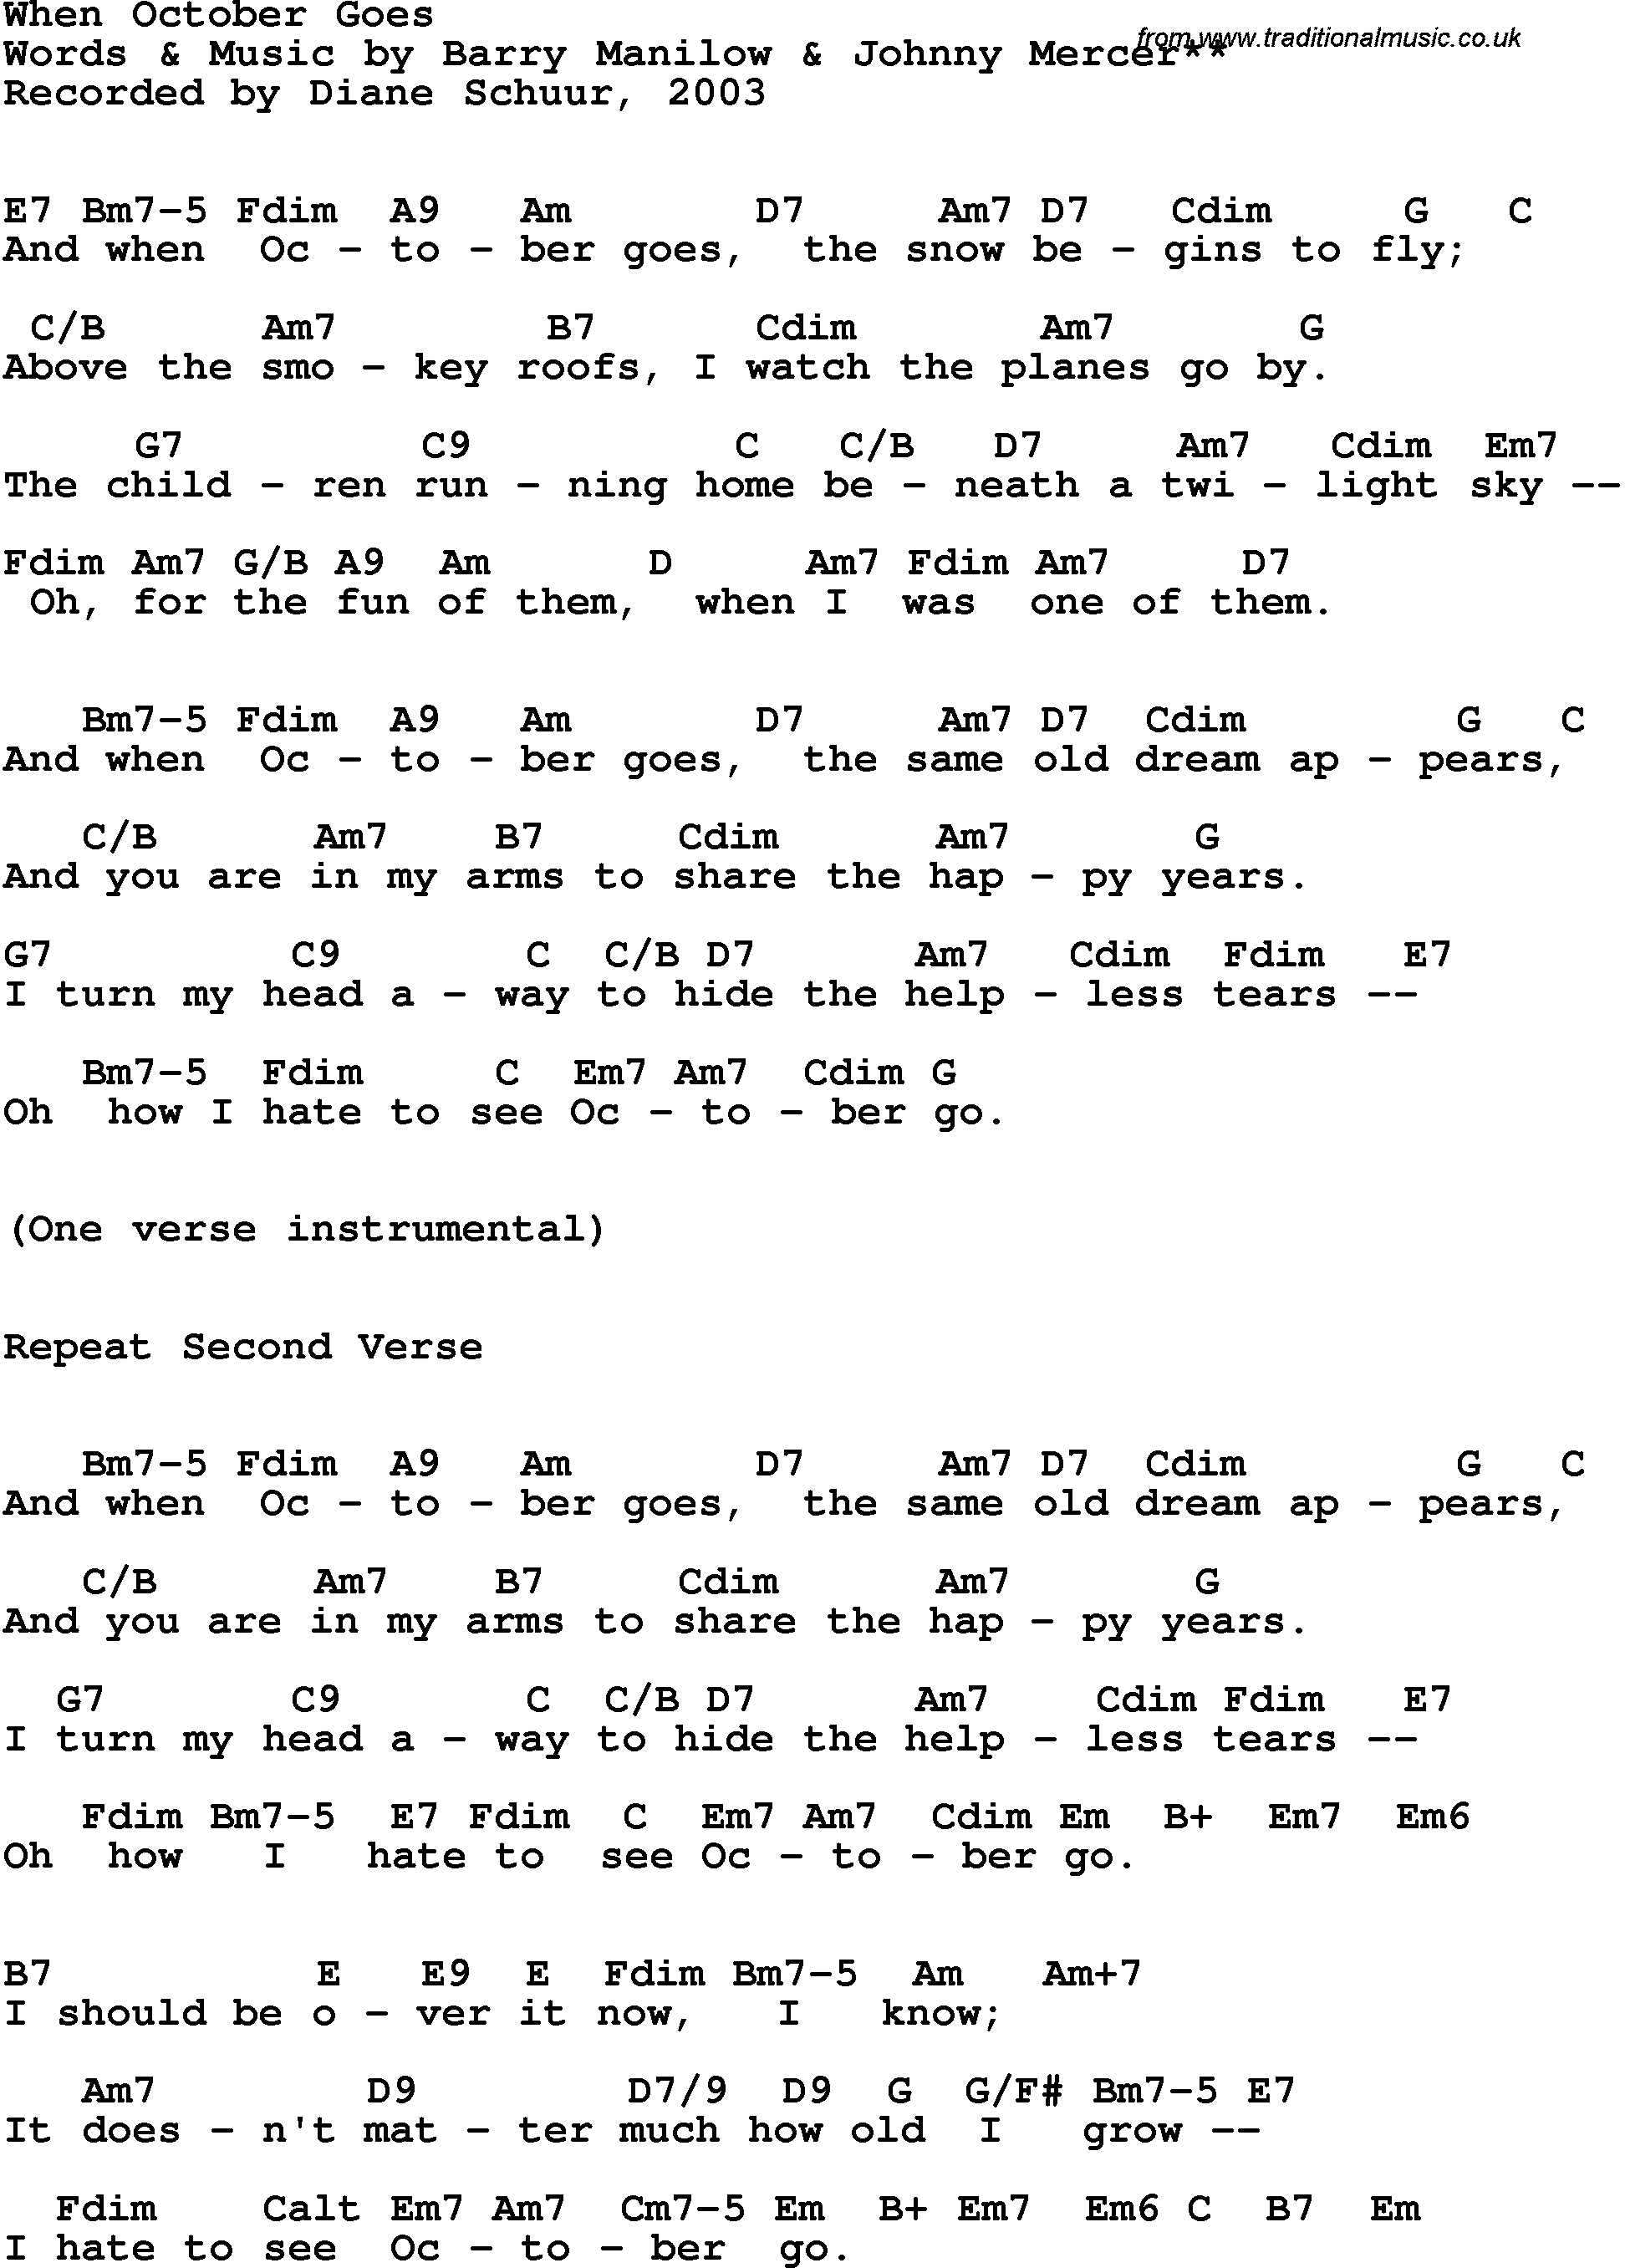 Song Lyrics with guitar chords for When October Goes - Diane Schuur, 2003